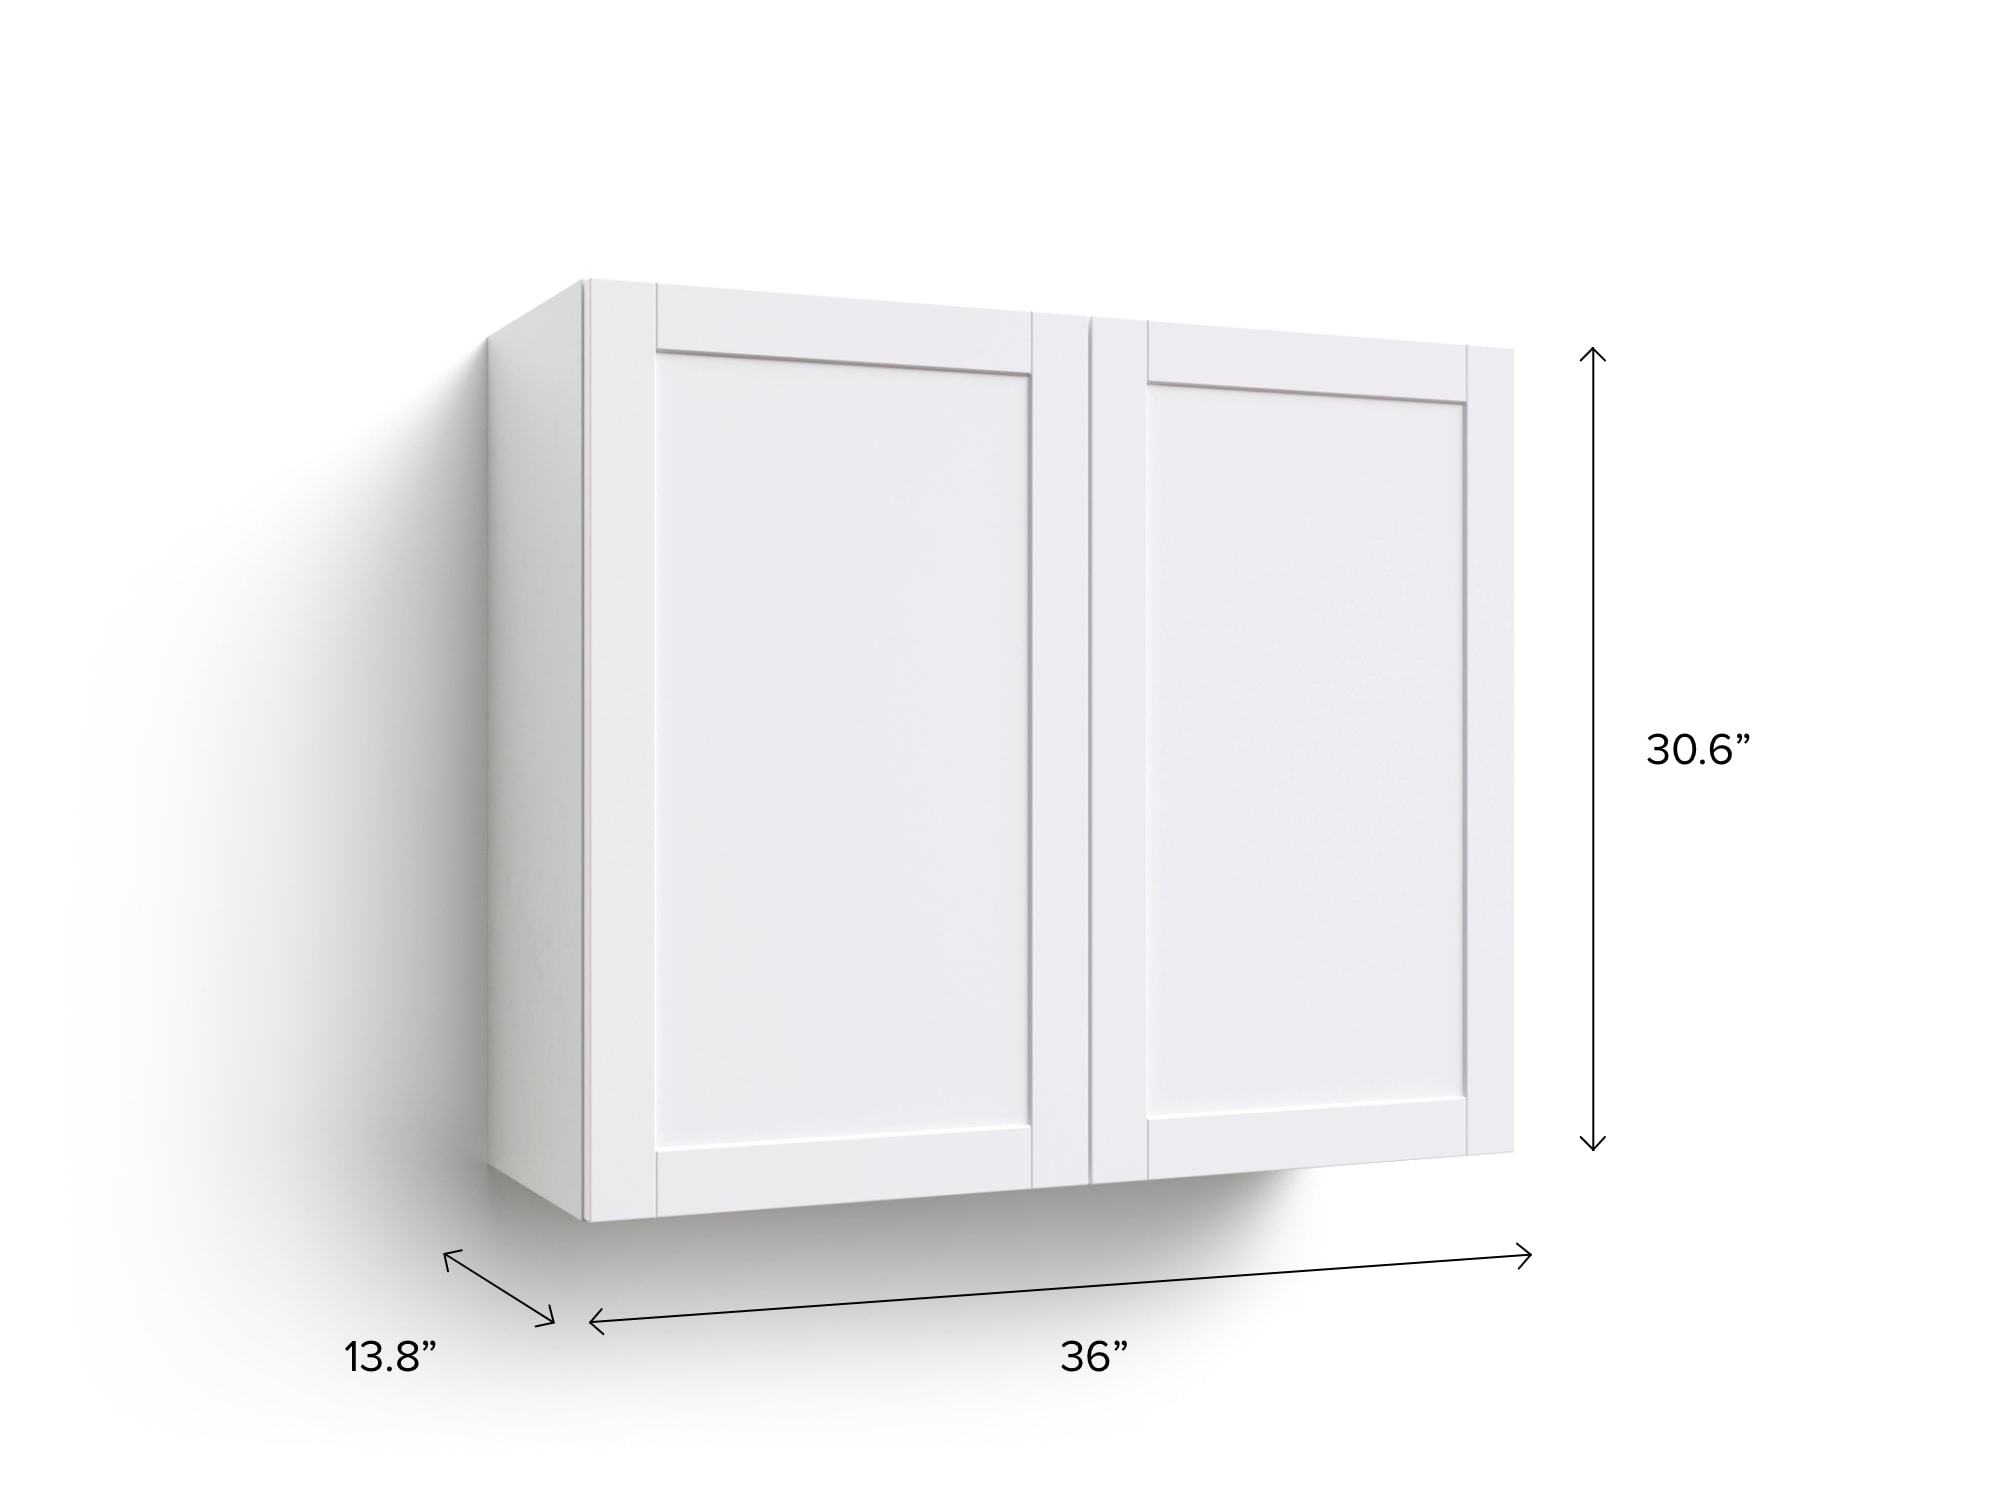 NewAge Products Home Cabinet 36-in W x 30.6-in H x 13.8-in D White Door ...